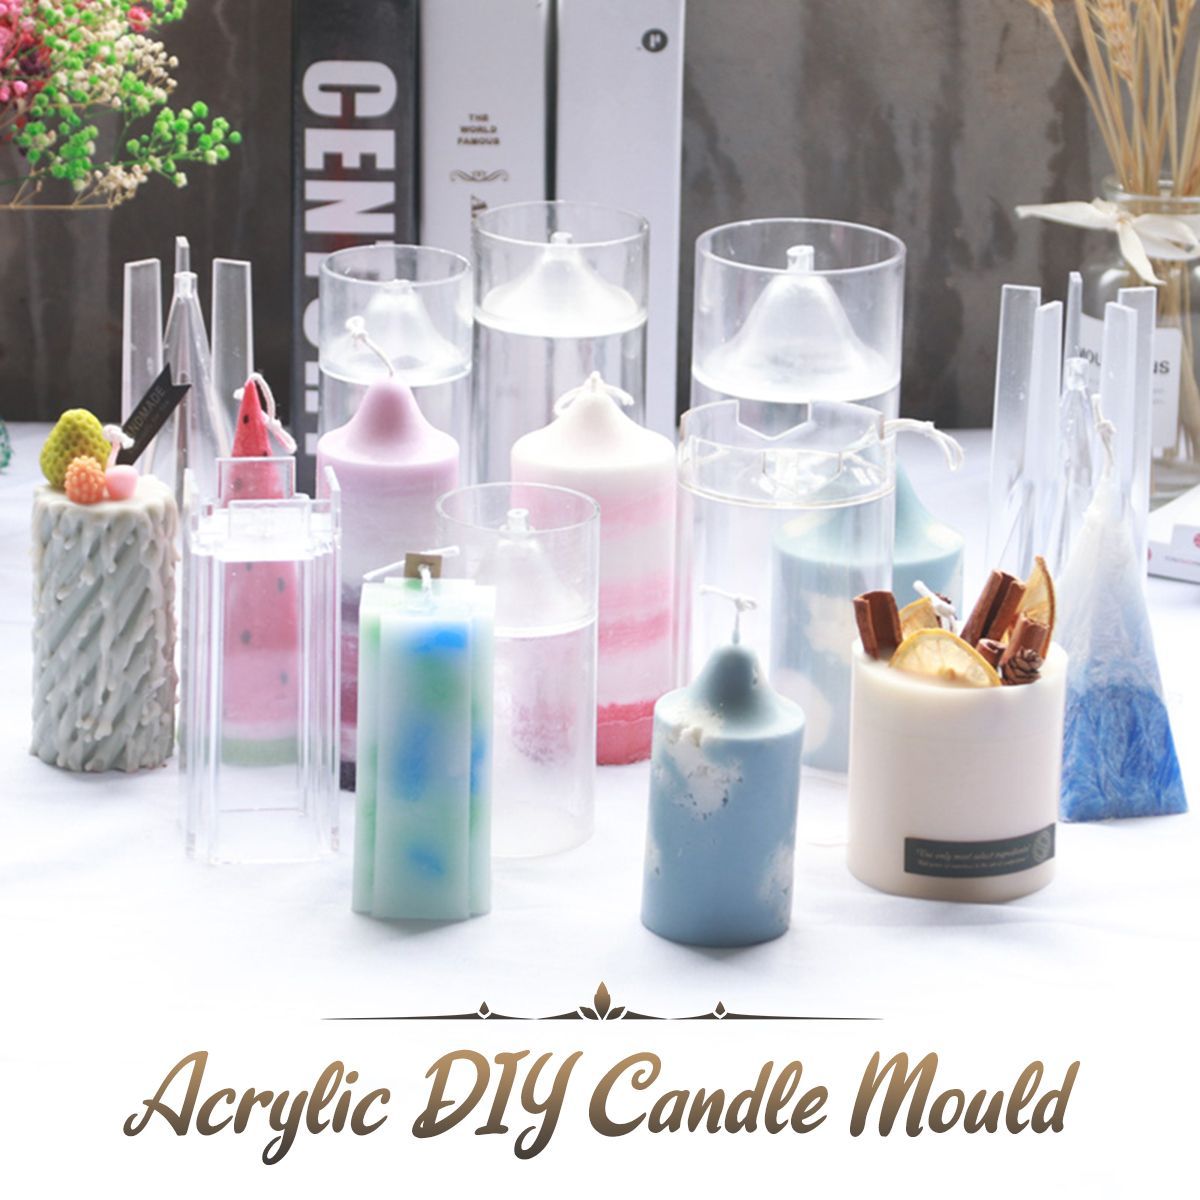 DIY-Candle-Molds-Candle-Making-Mould-Handmade-Soap-Acrylic-Mold-Clay-Craft-Gift-1597535